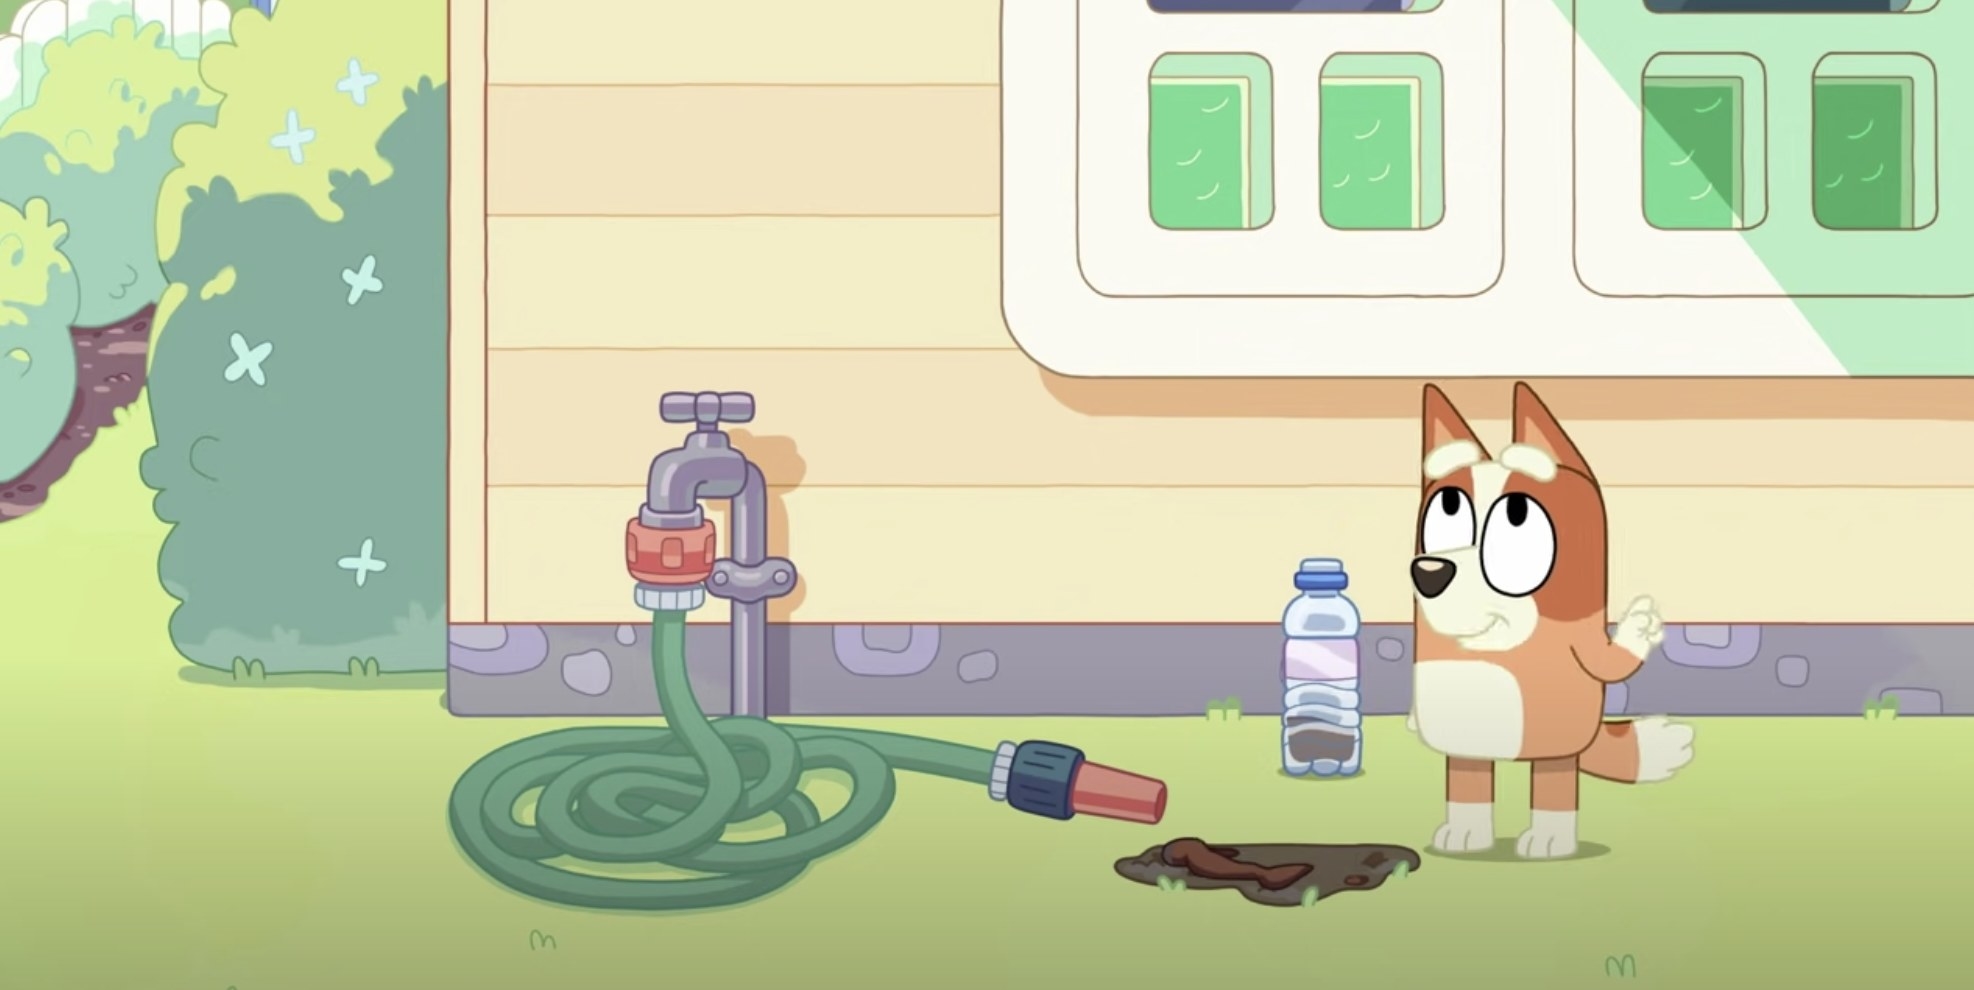 scene where Bingo is playing with a hose, water bottle, and dirt in the backyard